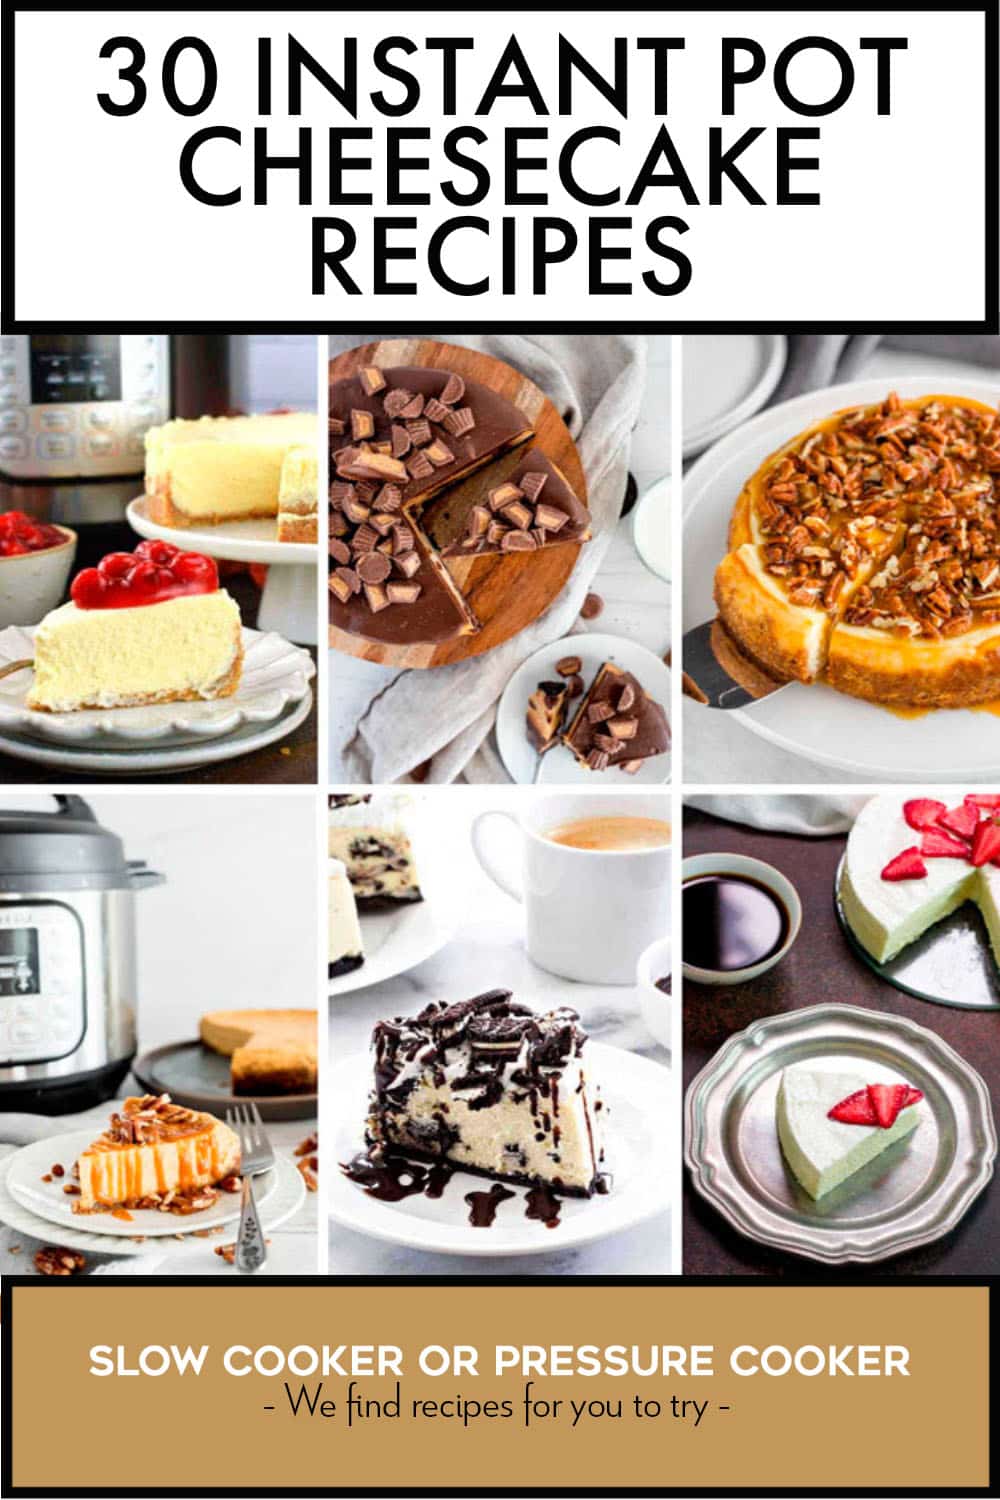 Pinterest image of 30 Instant Pot Cheesecake Recipes